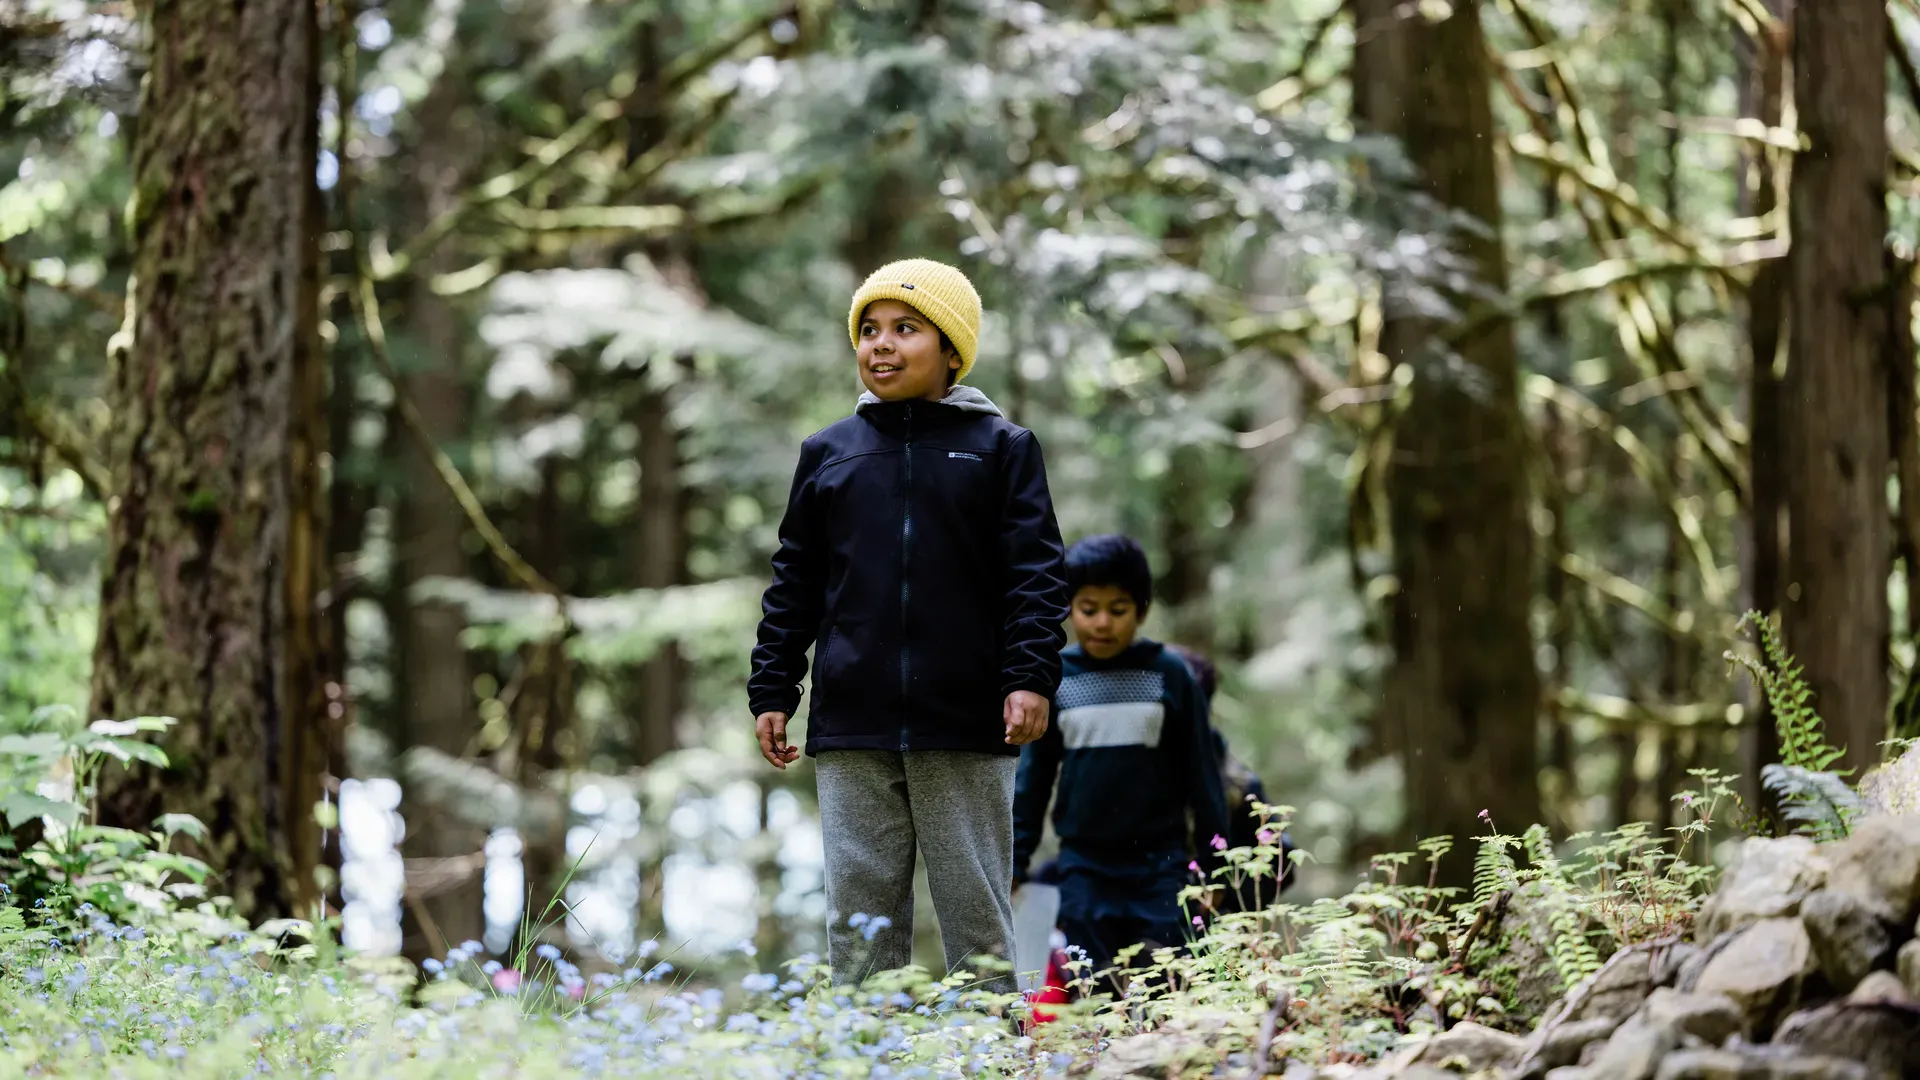 Cheerful kids in the forest